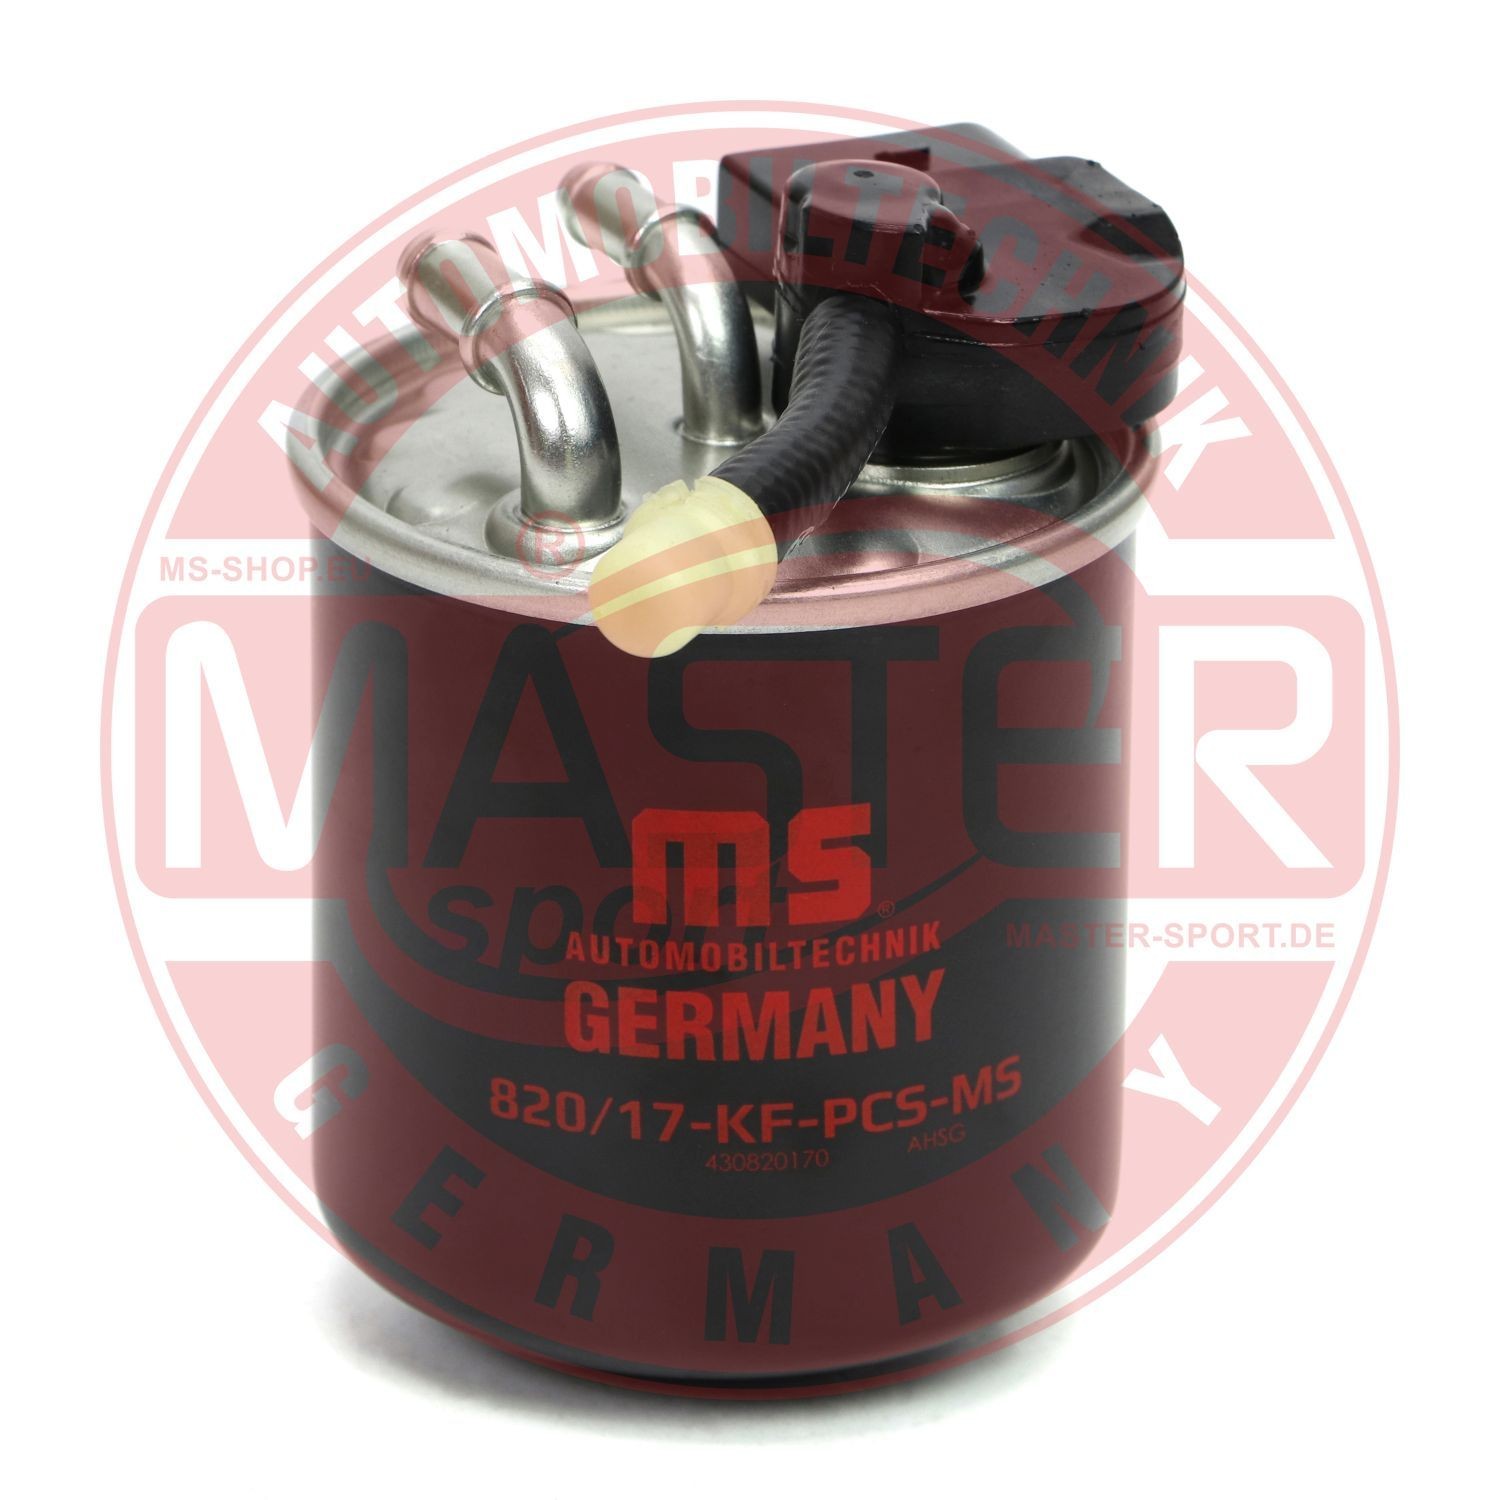 MASTER-SPORT 820/17-KF-PCS-MS Fuel filter MERCEDES-BENZ experience and price